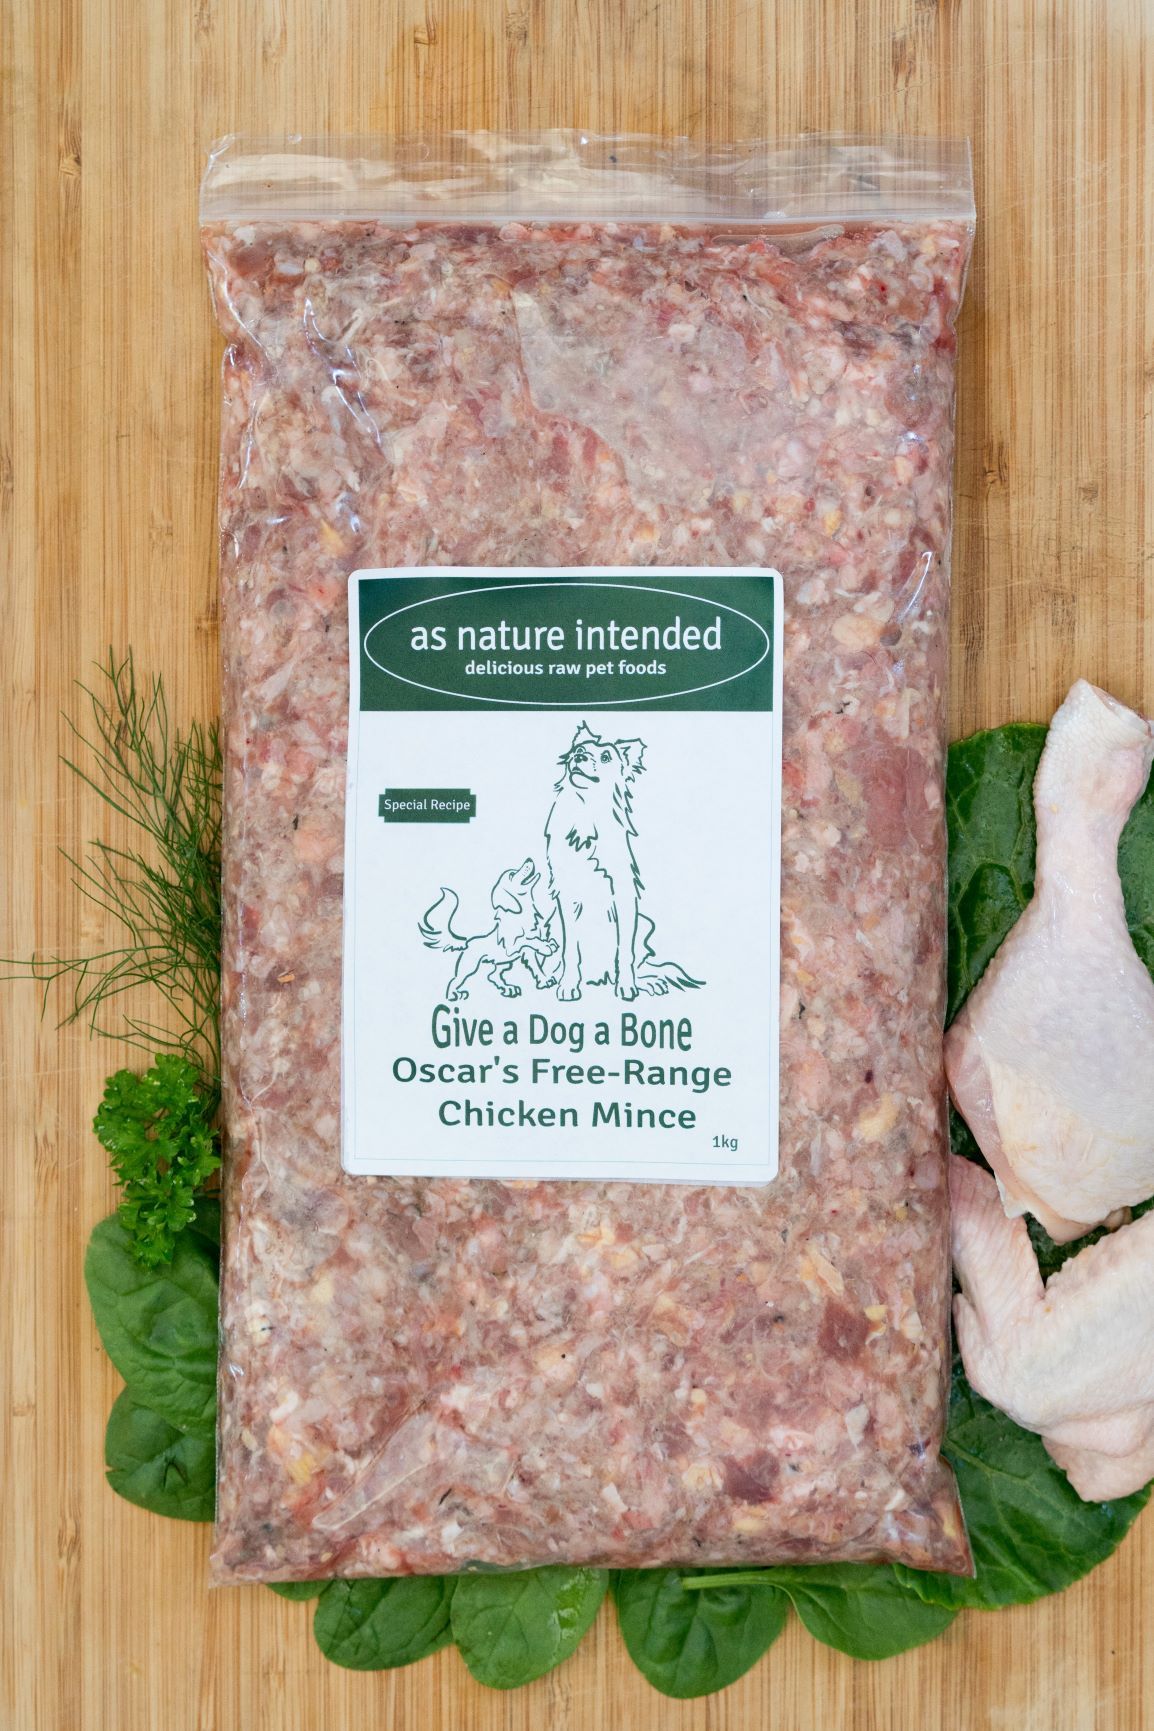 As Nature Intended - Oscar's Free-Range Chicken Mince for Dogs (for Skin Allergy Problems)